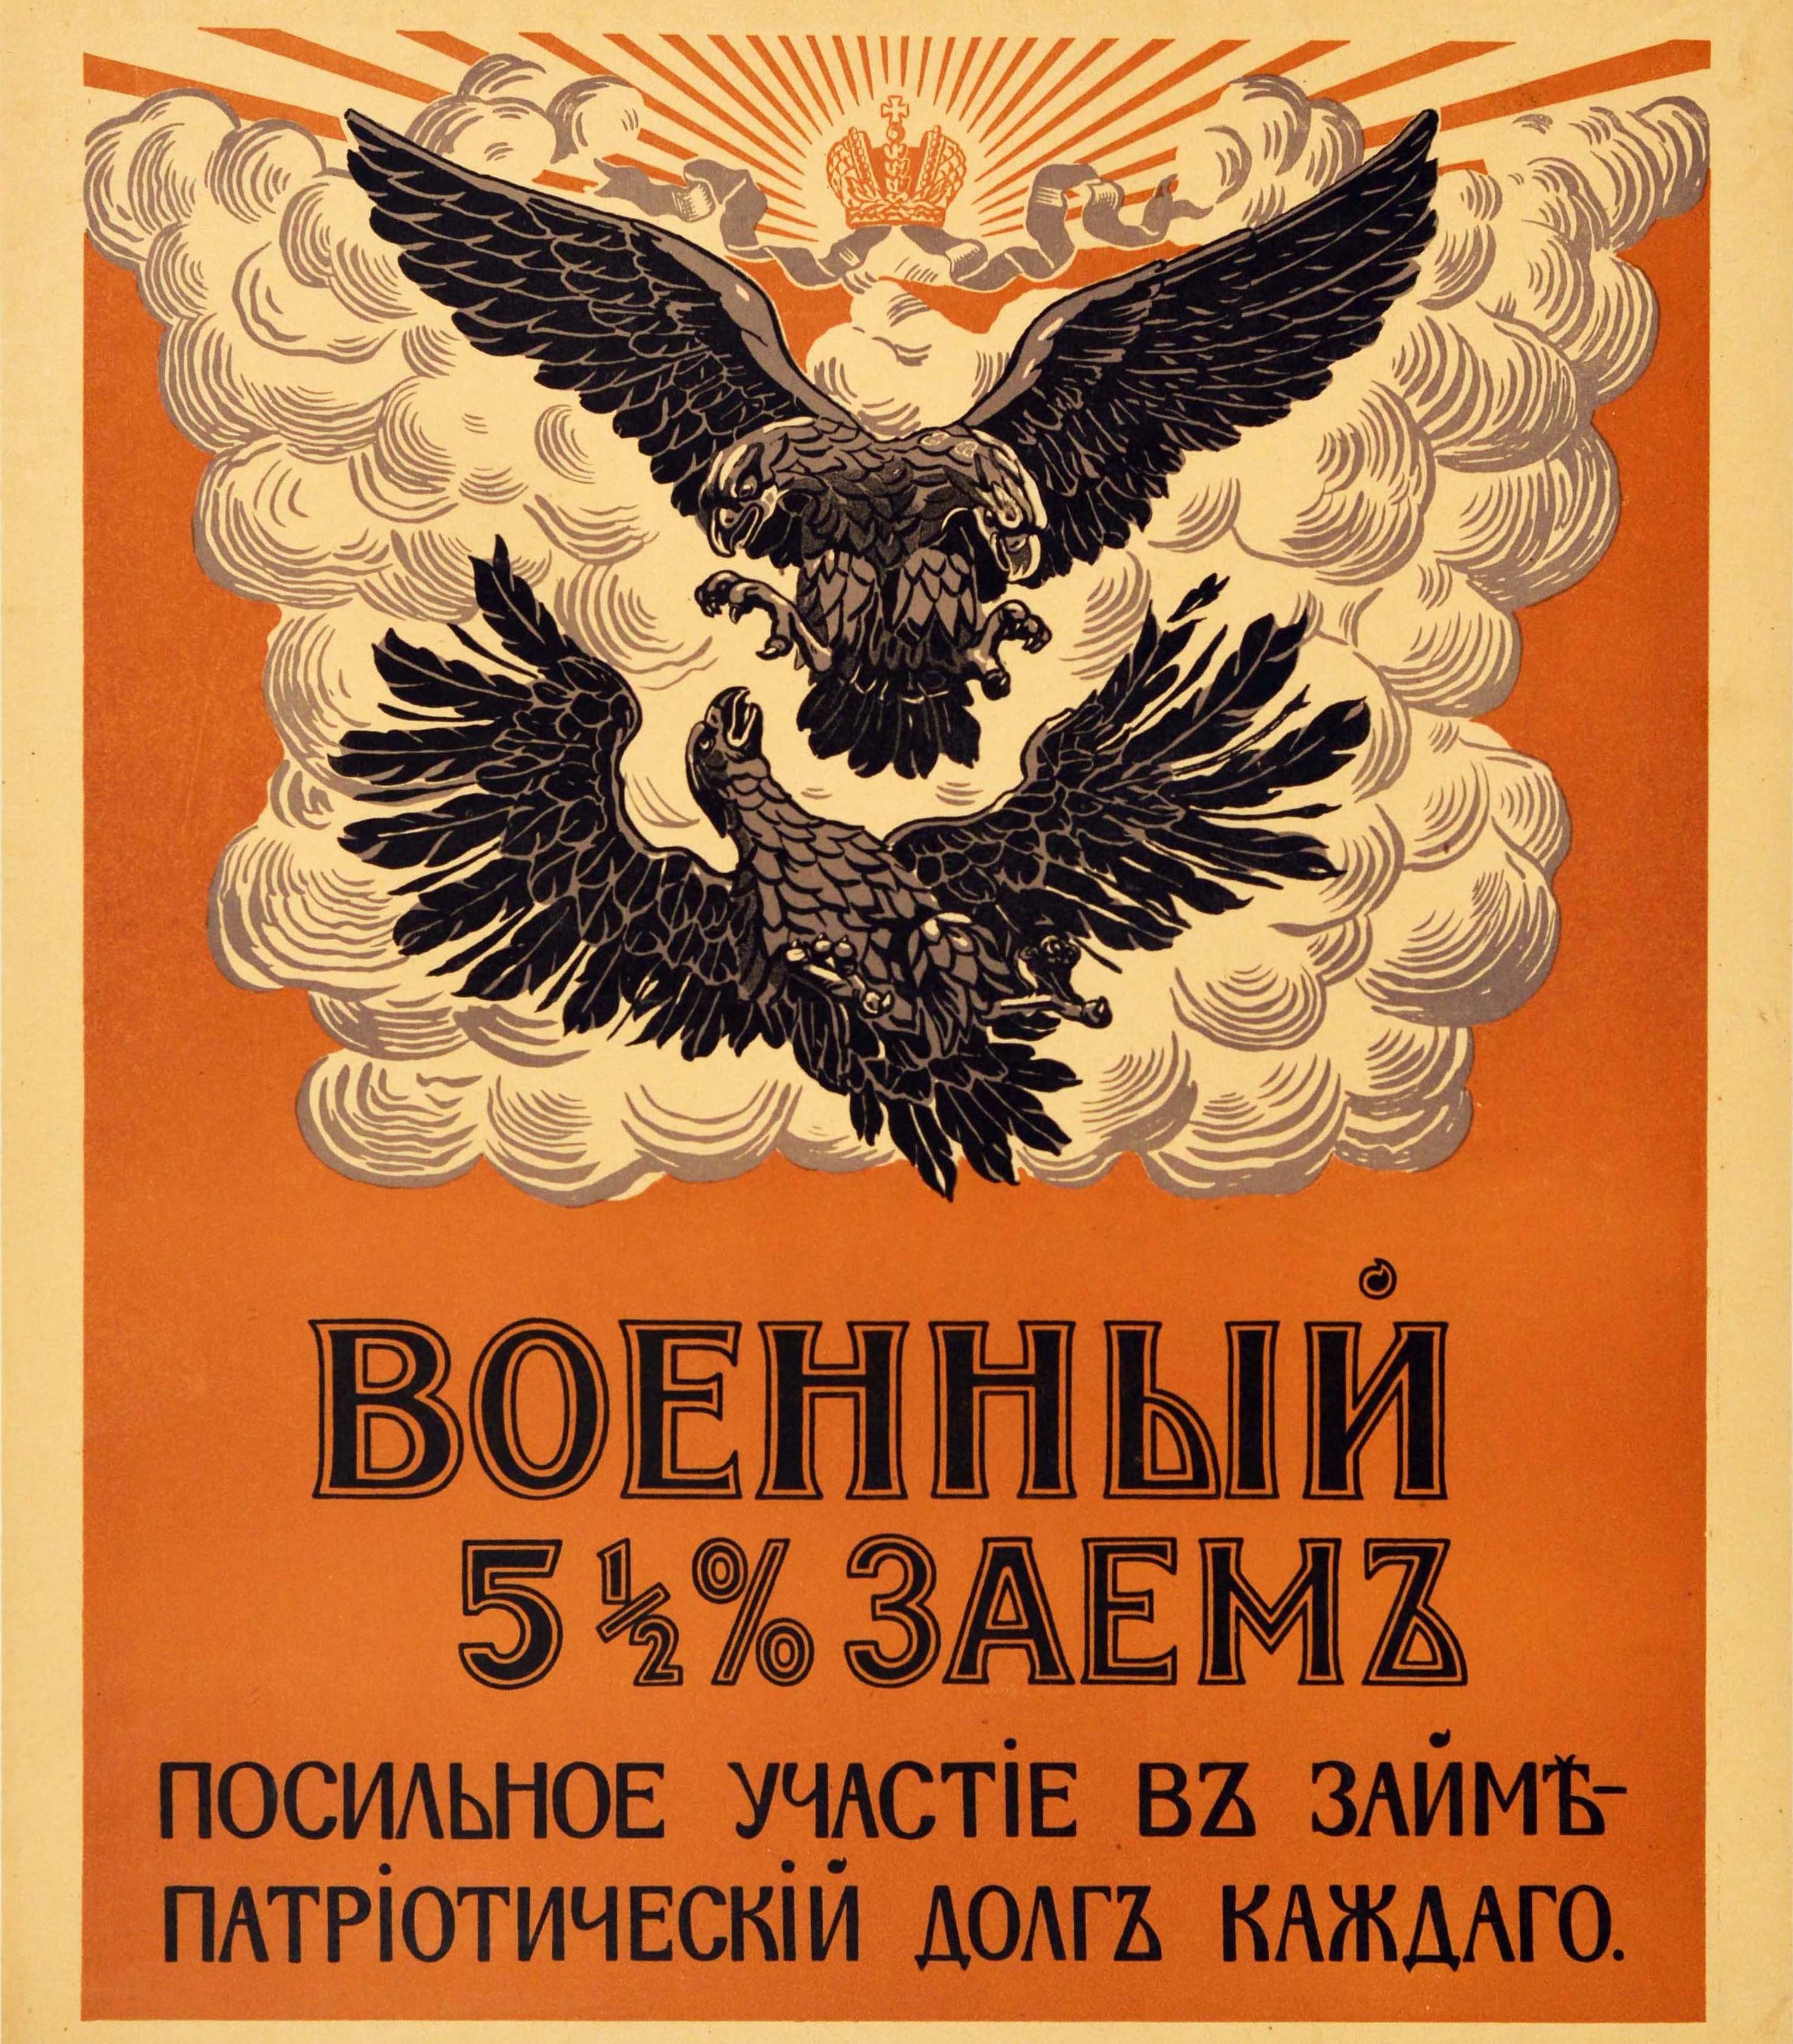 Original antique World War One war loan poster - Buy Military Loan 5½% Participation in a Loan is a Patriotic Duty of Everyone / Посильное участие в займе - патриотический долг каждого - featuring a dynamic design depicting a double headed eagle